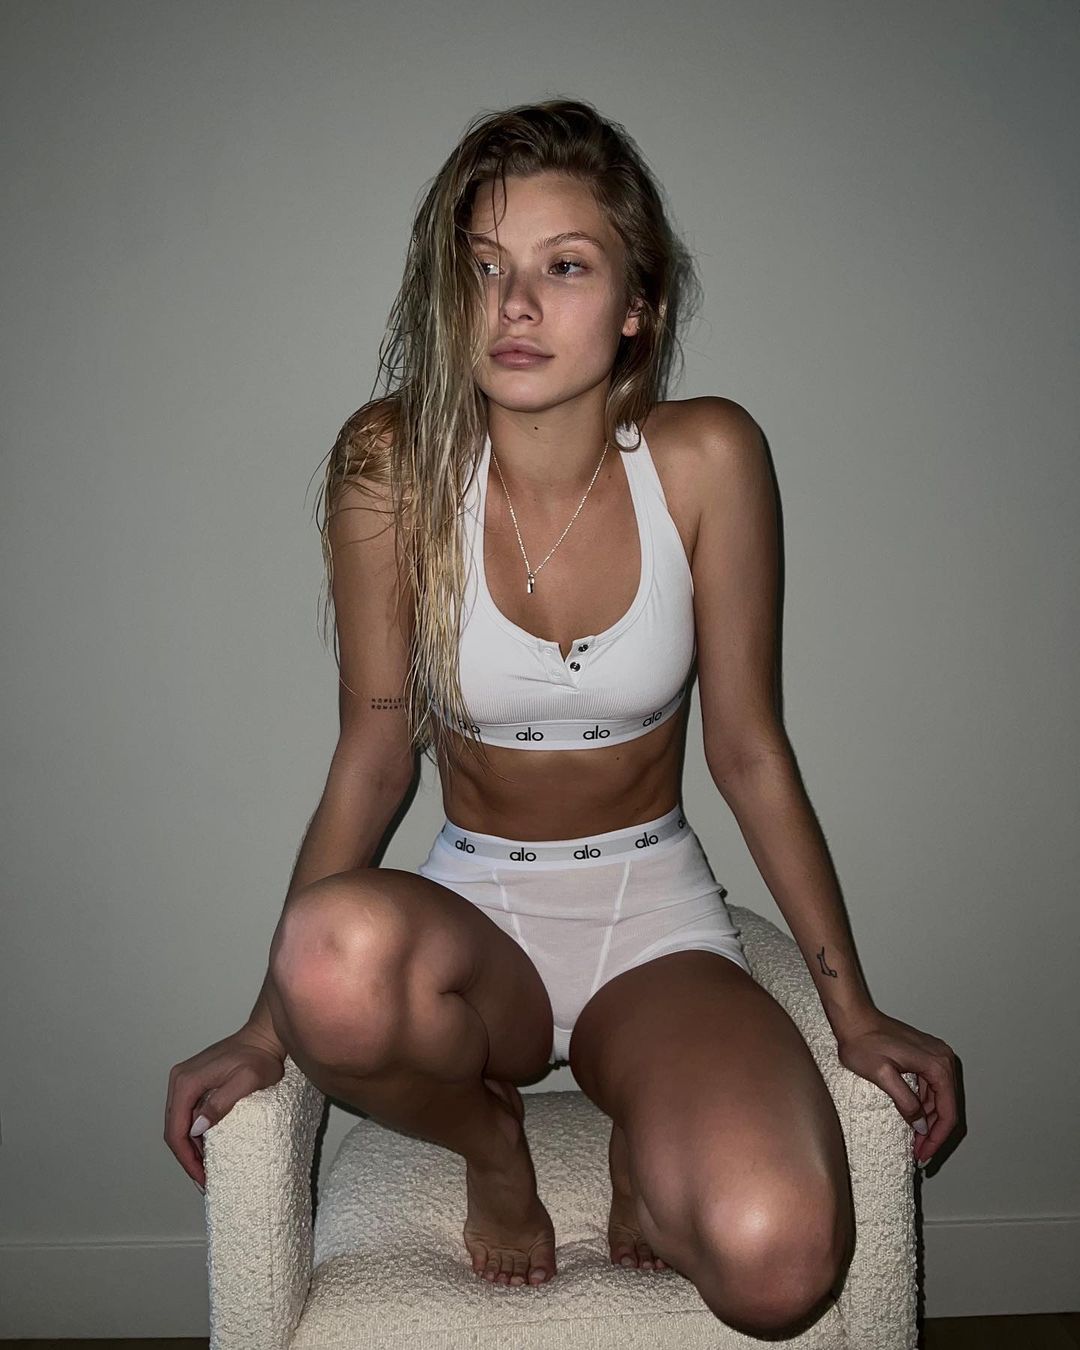 Photos n°2 : Josie Canseco Poses in Her Underwear!